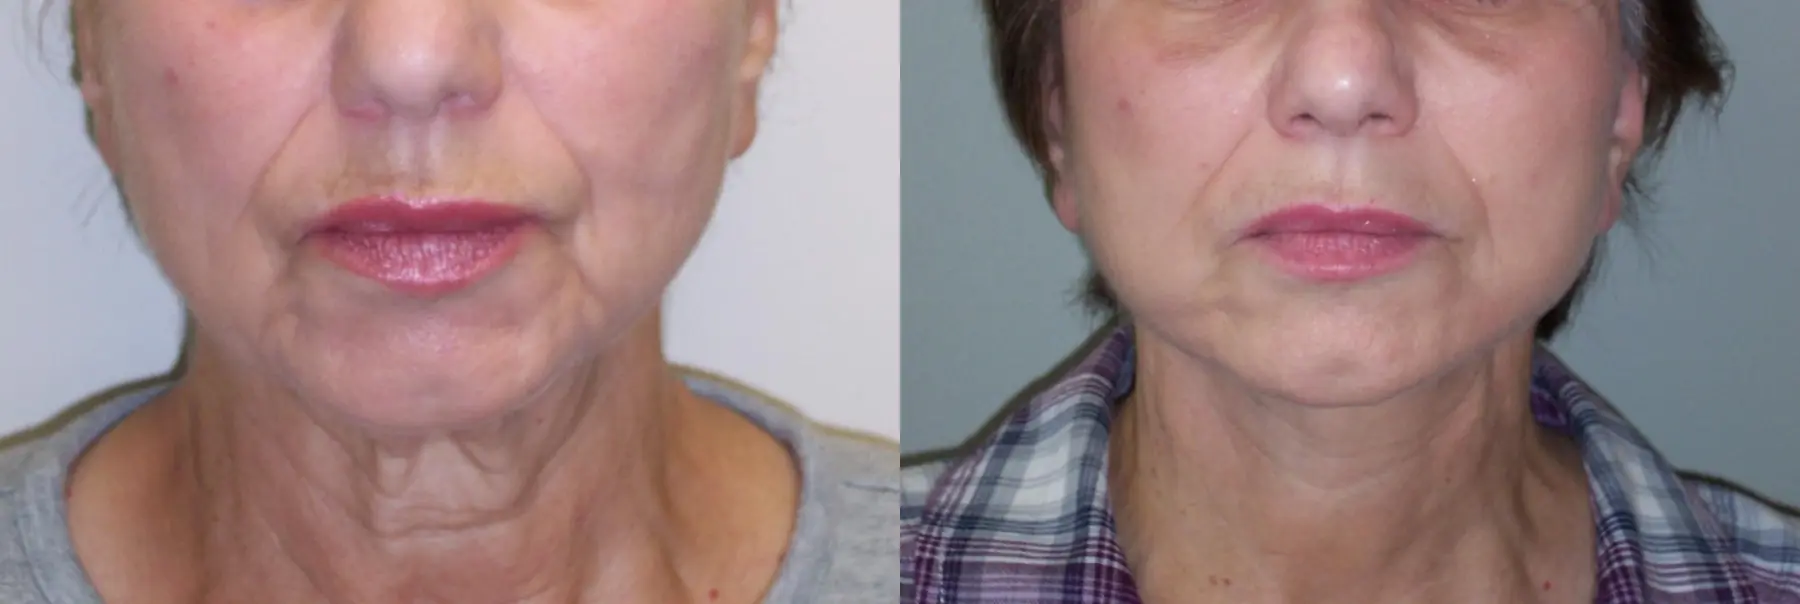 Facelift: Patient 10 - Before and After 2